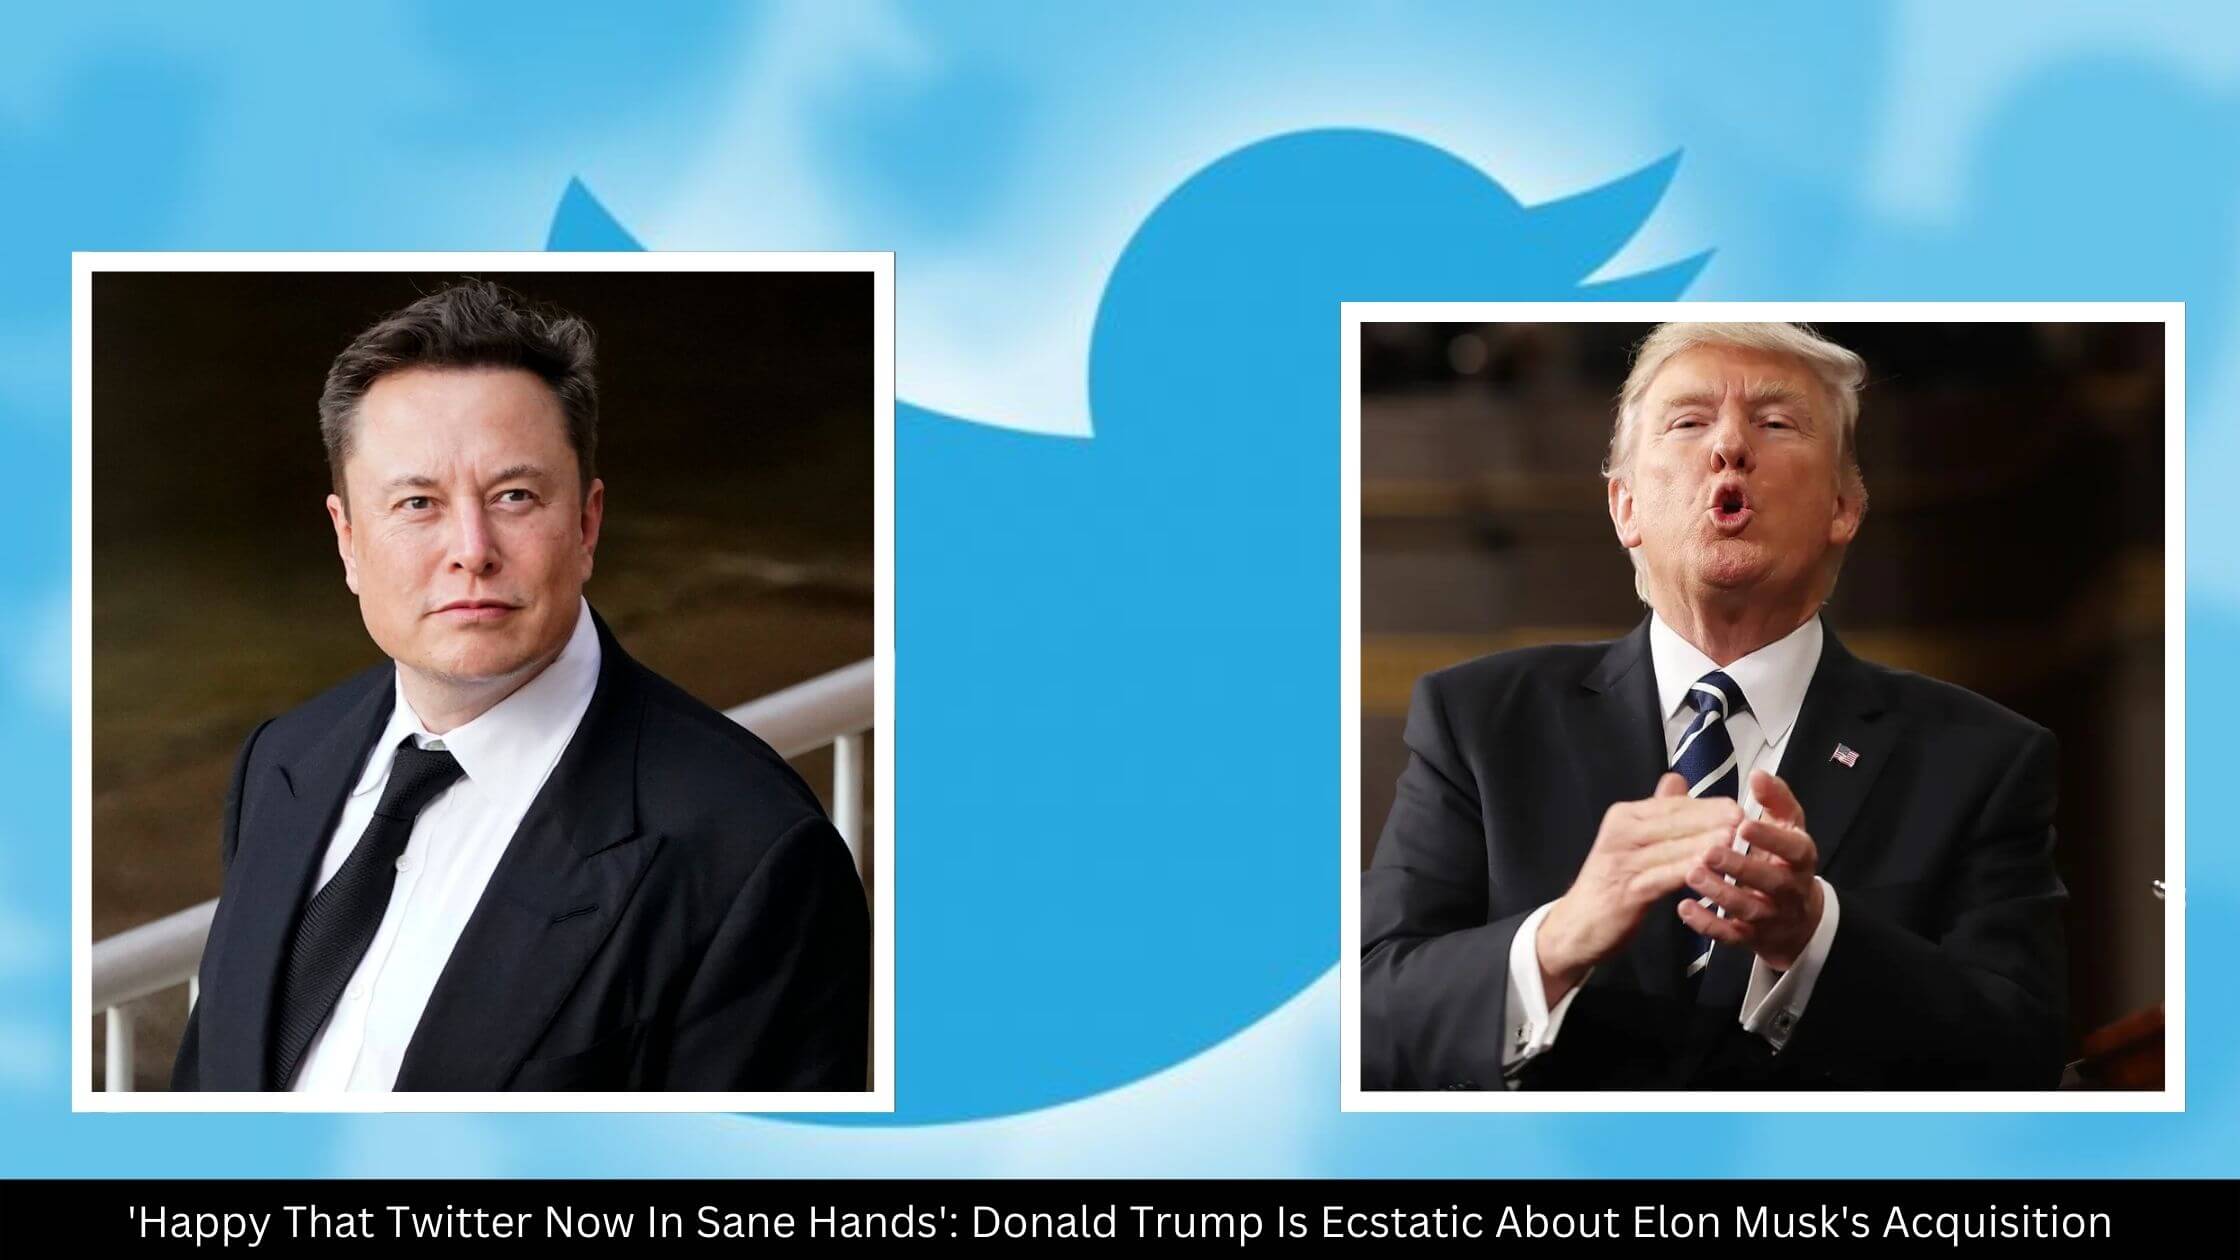 'Happy That Twitter Now In Sane Hands' Donald Trump Is Ecstatic About Elon Musk's Acquisition